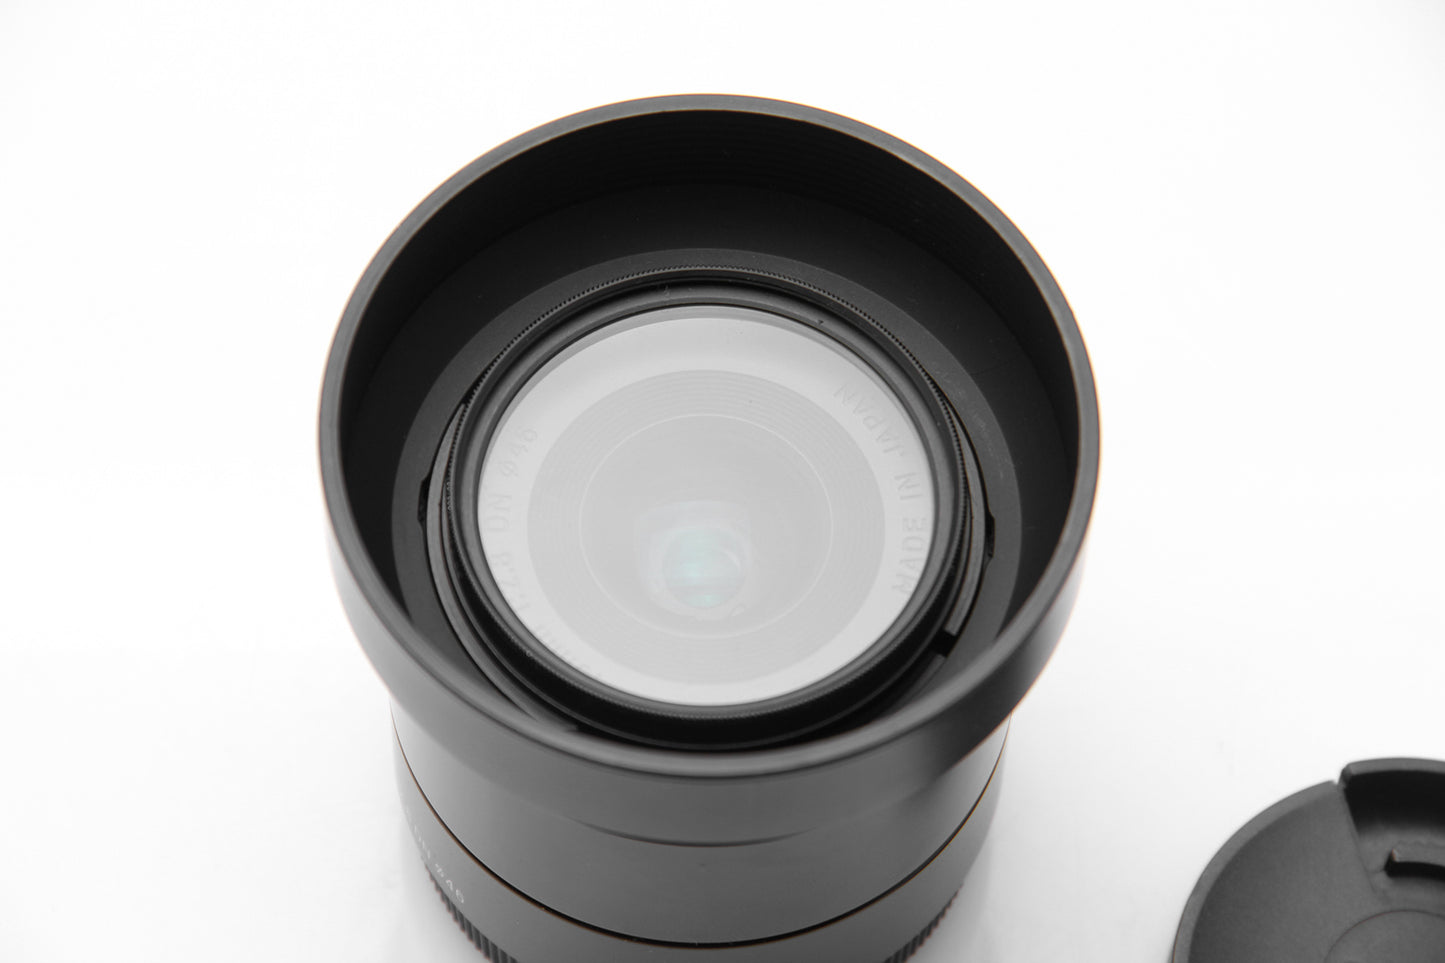 Sigma 19mm f/2.8 DN Lens for Sony